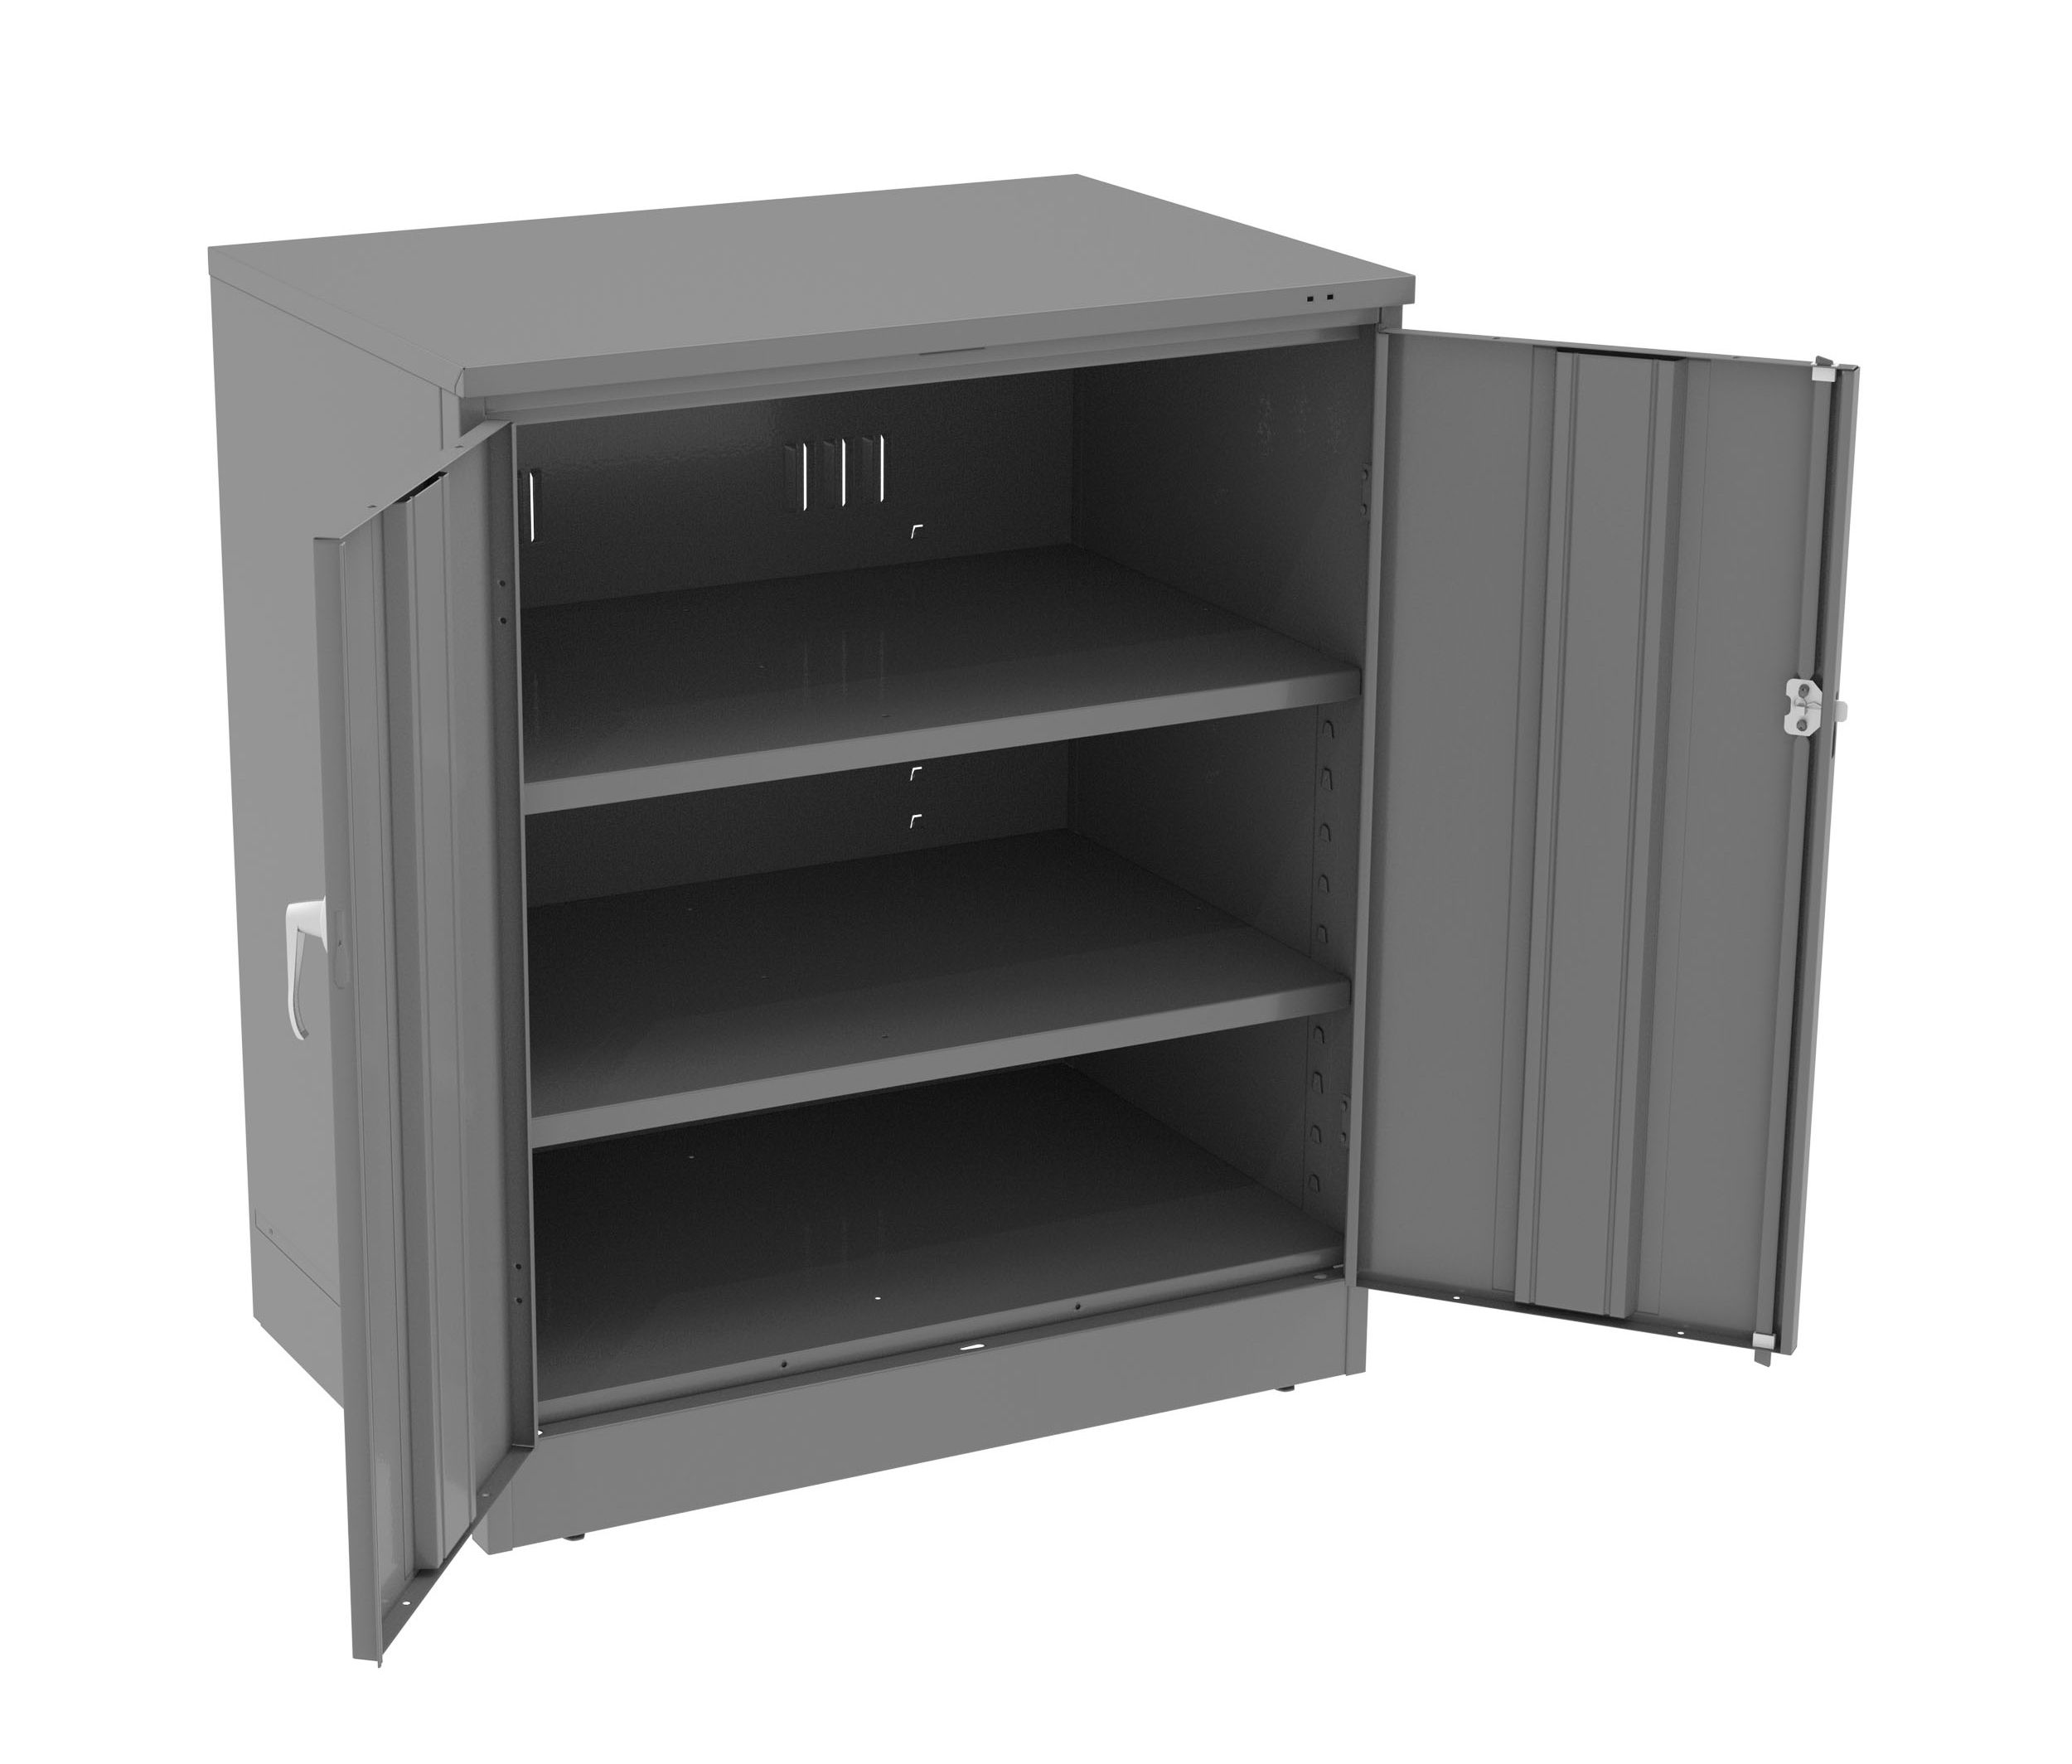 Tennsco - Storage Made Easy - Deluxe Counter High Cabinet (Unassembled)